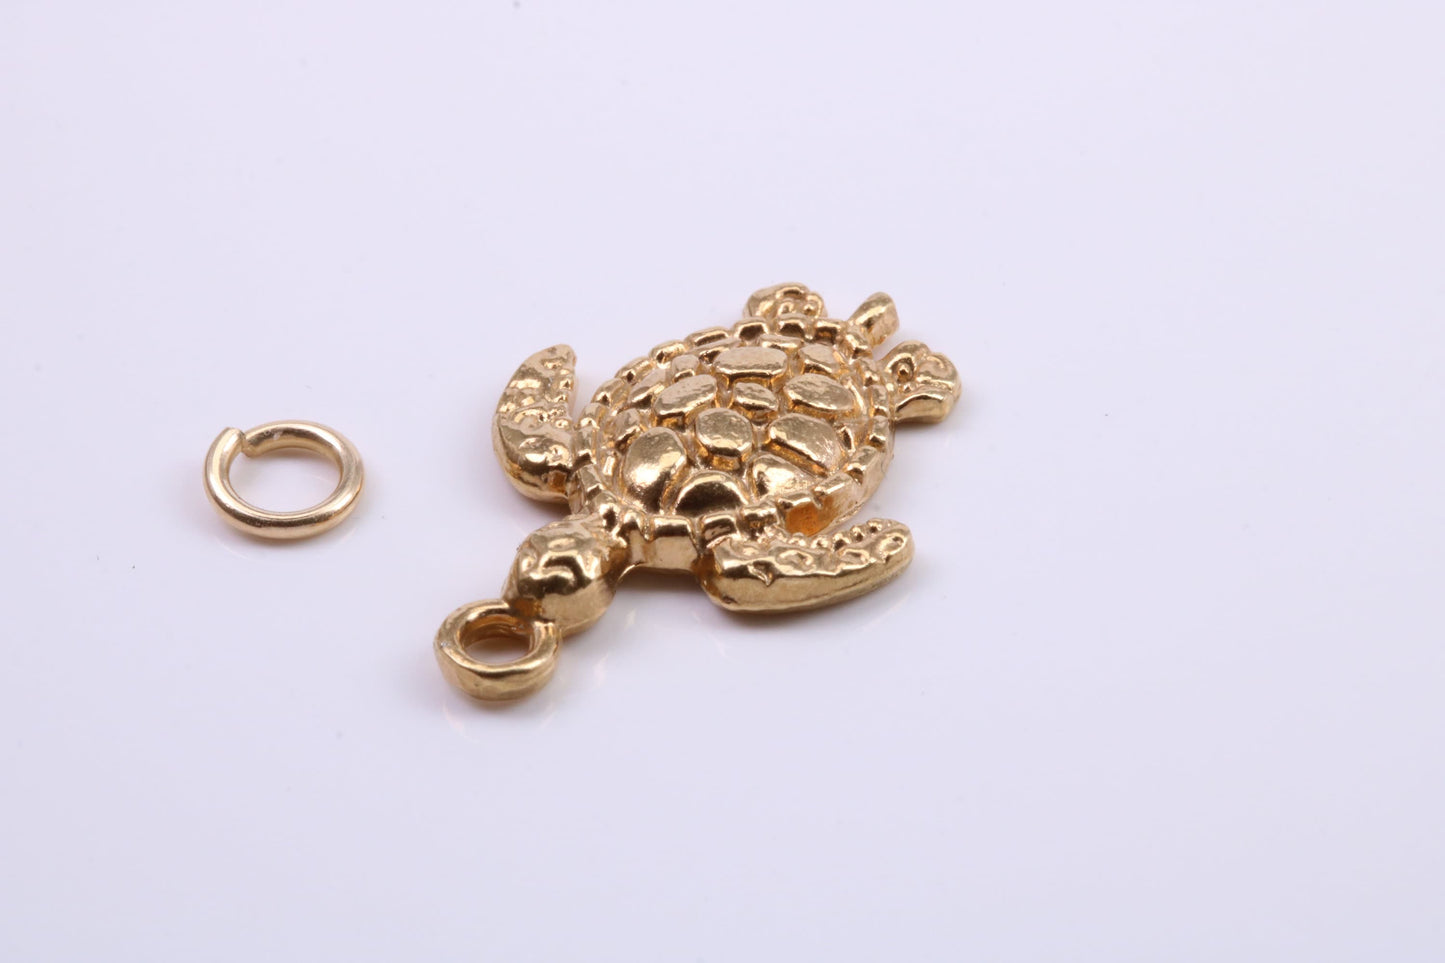 Turtle Charm, Traditional Charm, Made from Solid 9ct Yellow Gold, British Hallmarked, Complete with Attachment Link